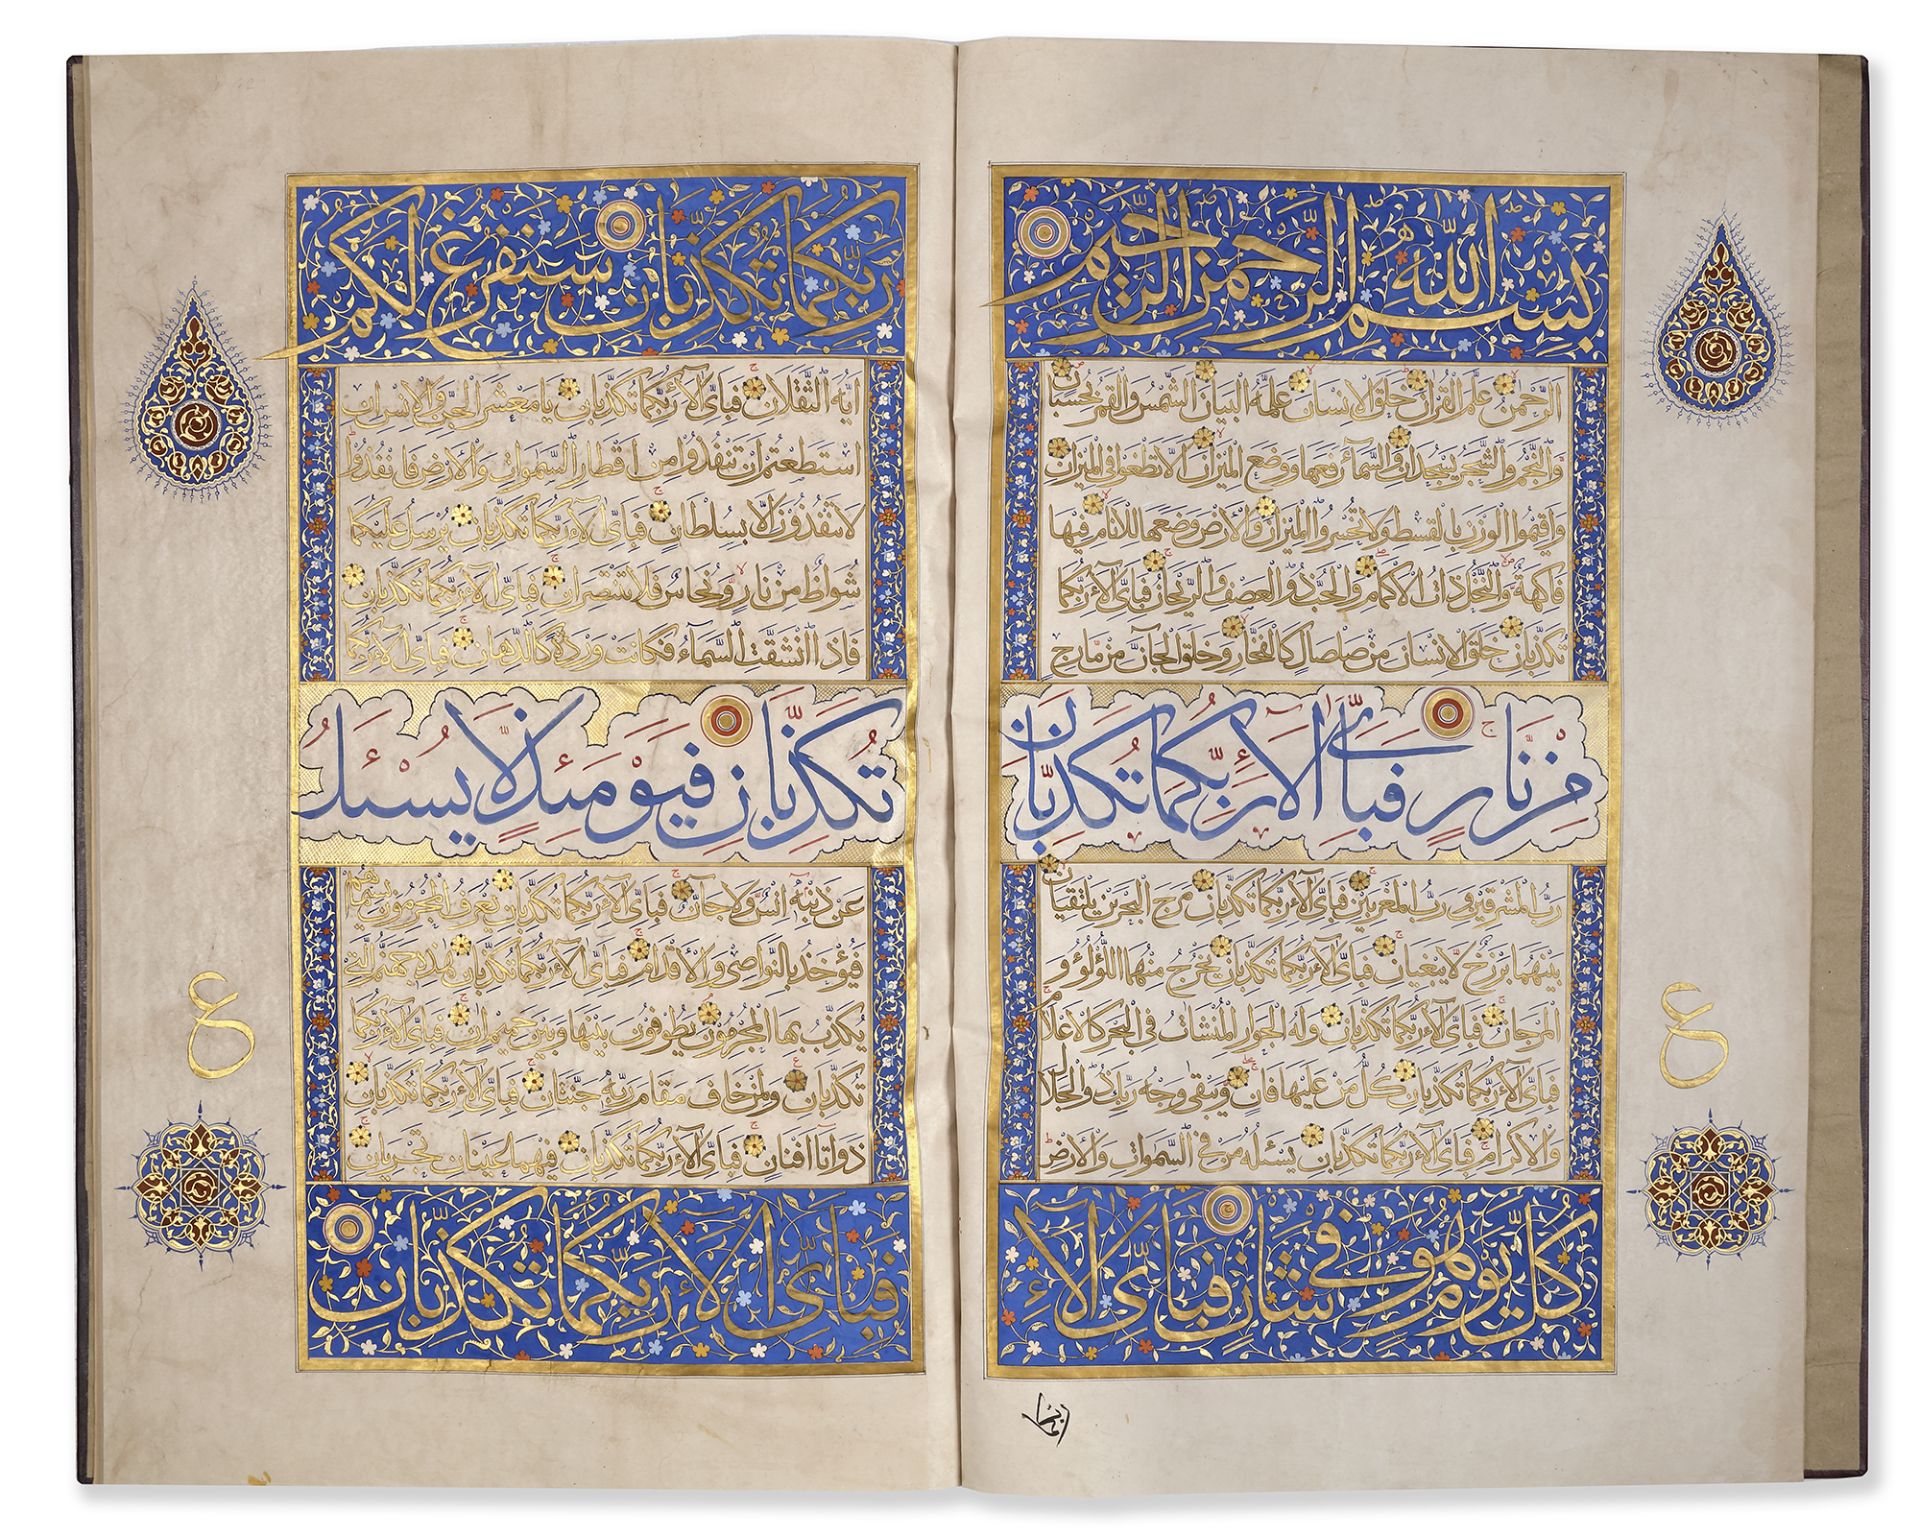 A LARGE ILLUMINATED QURAN JUZ, CENTRAL ASIA, LATE 19TH-EARLY 20TH CENTURY - Bild 3 aus 6